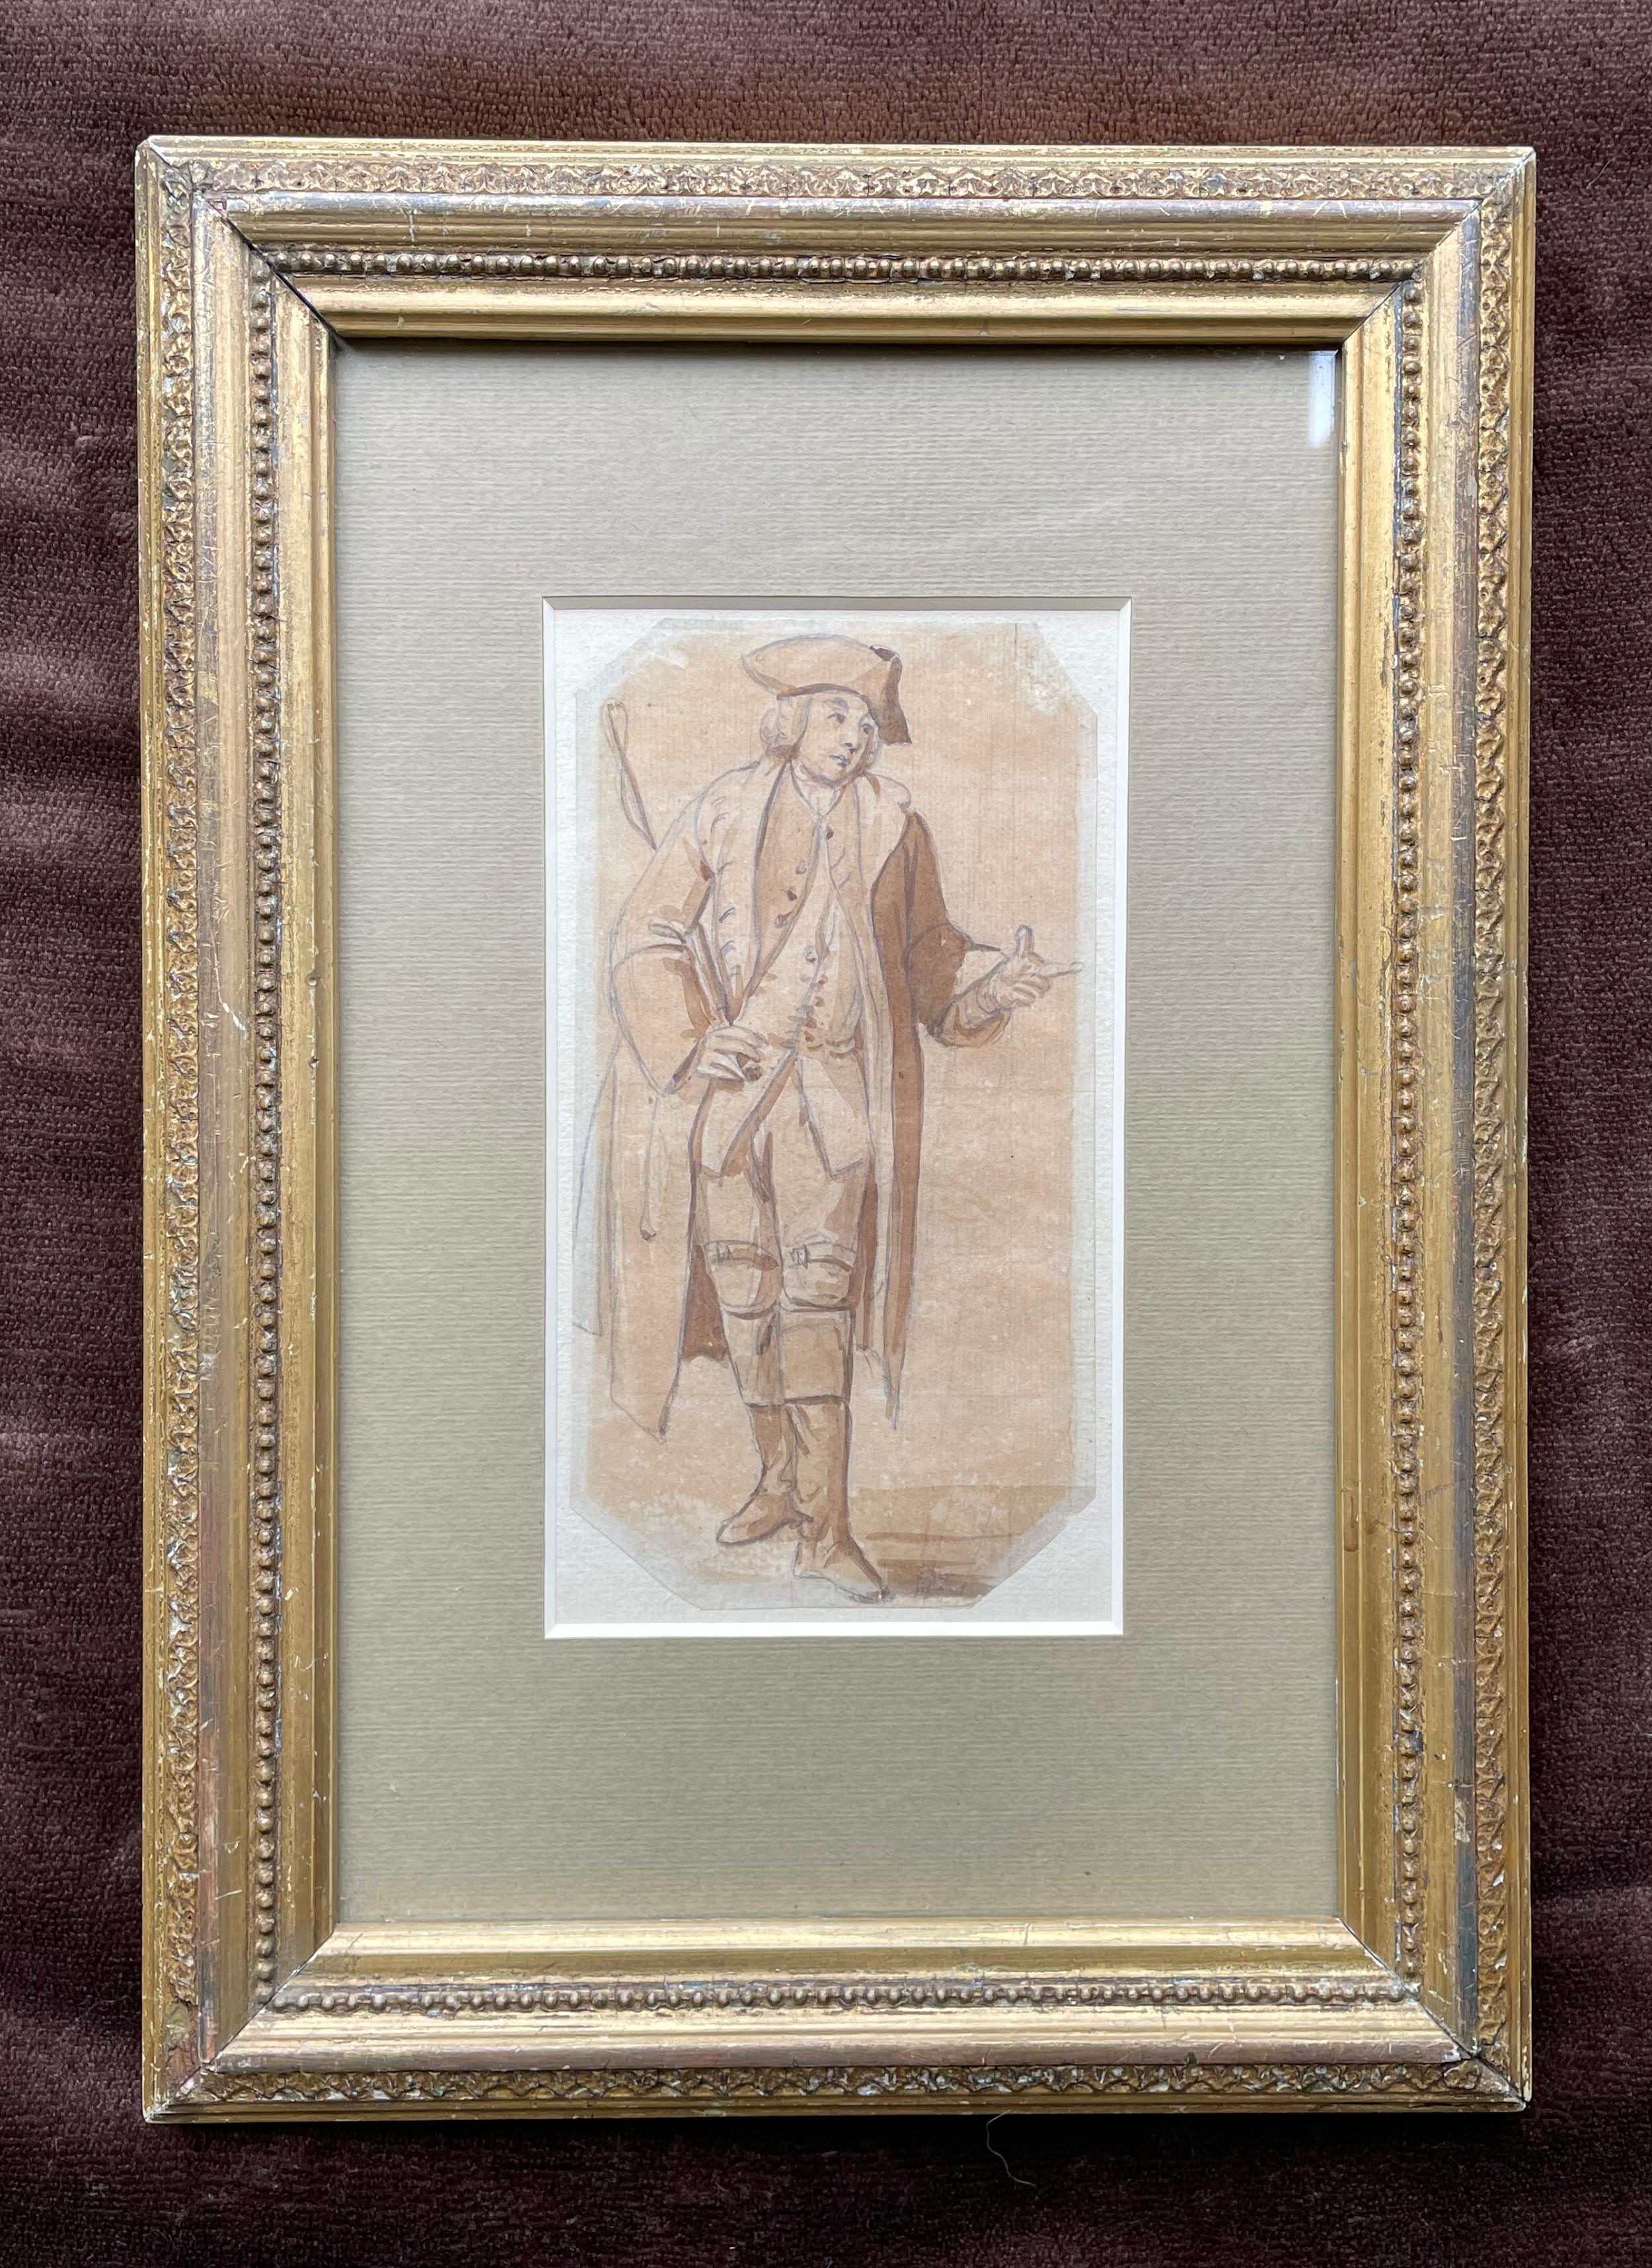 PAUL SANDBY
(1731-1809)

Study of a Coachman

Pencil and brown wash, shaped
Framed

16.5 by 9 cm., 6 ½ by 3 ½ in.
(frame size 32 by 22.5 cm., 12 ½ by 9 in.)

Provenance:
Iolo Williams;
Private collection.

Exhibited:
Sudbury, Gainsborough House,